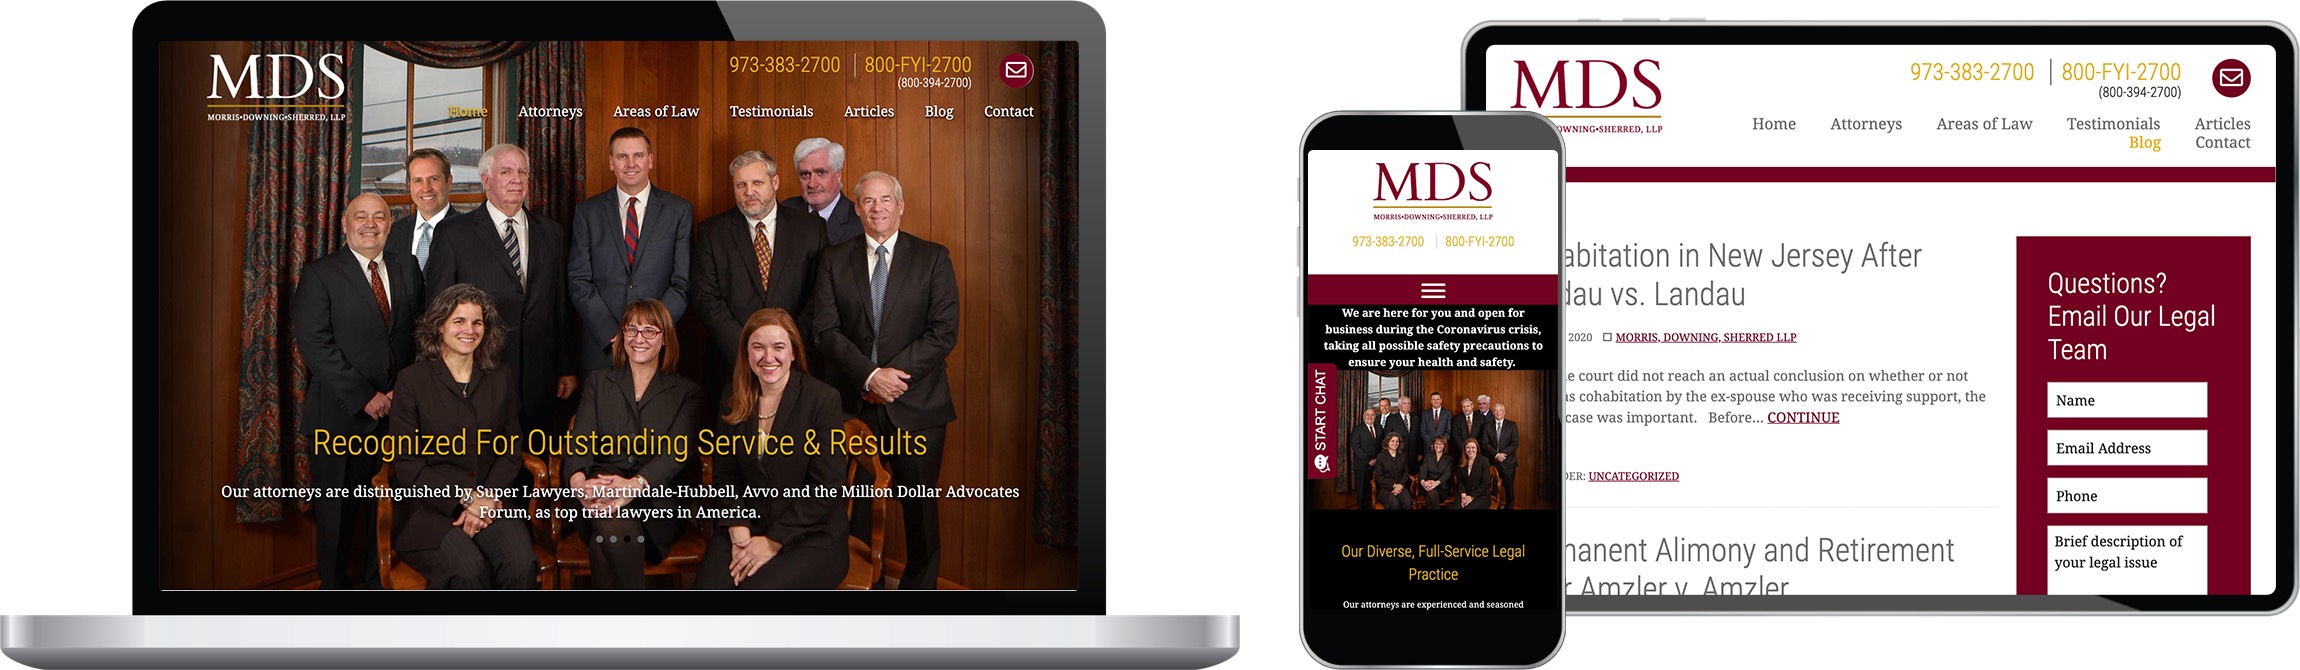 MDS Law Firm